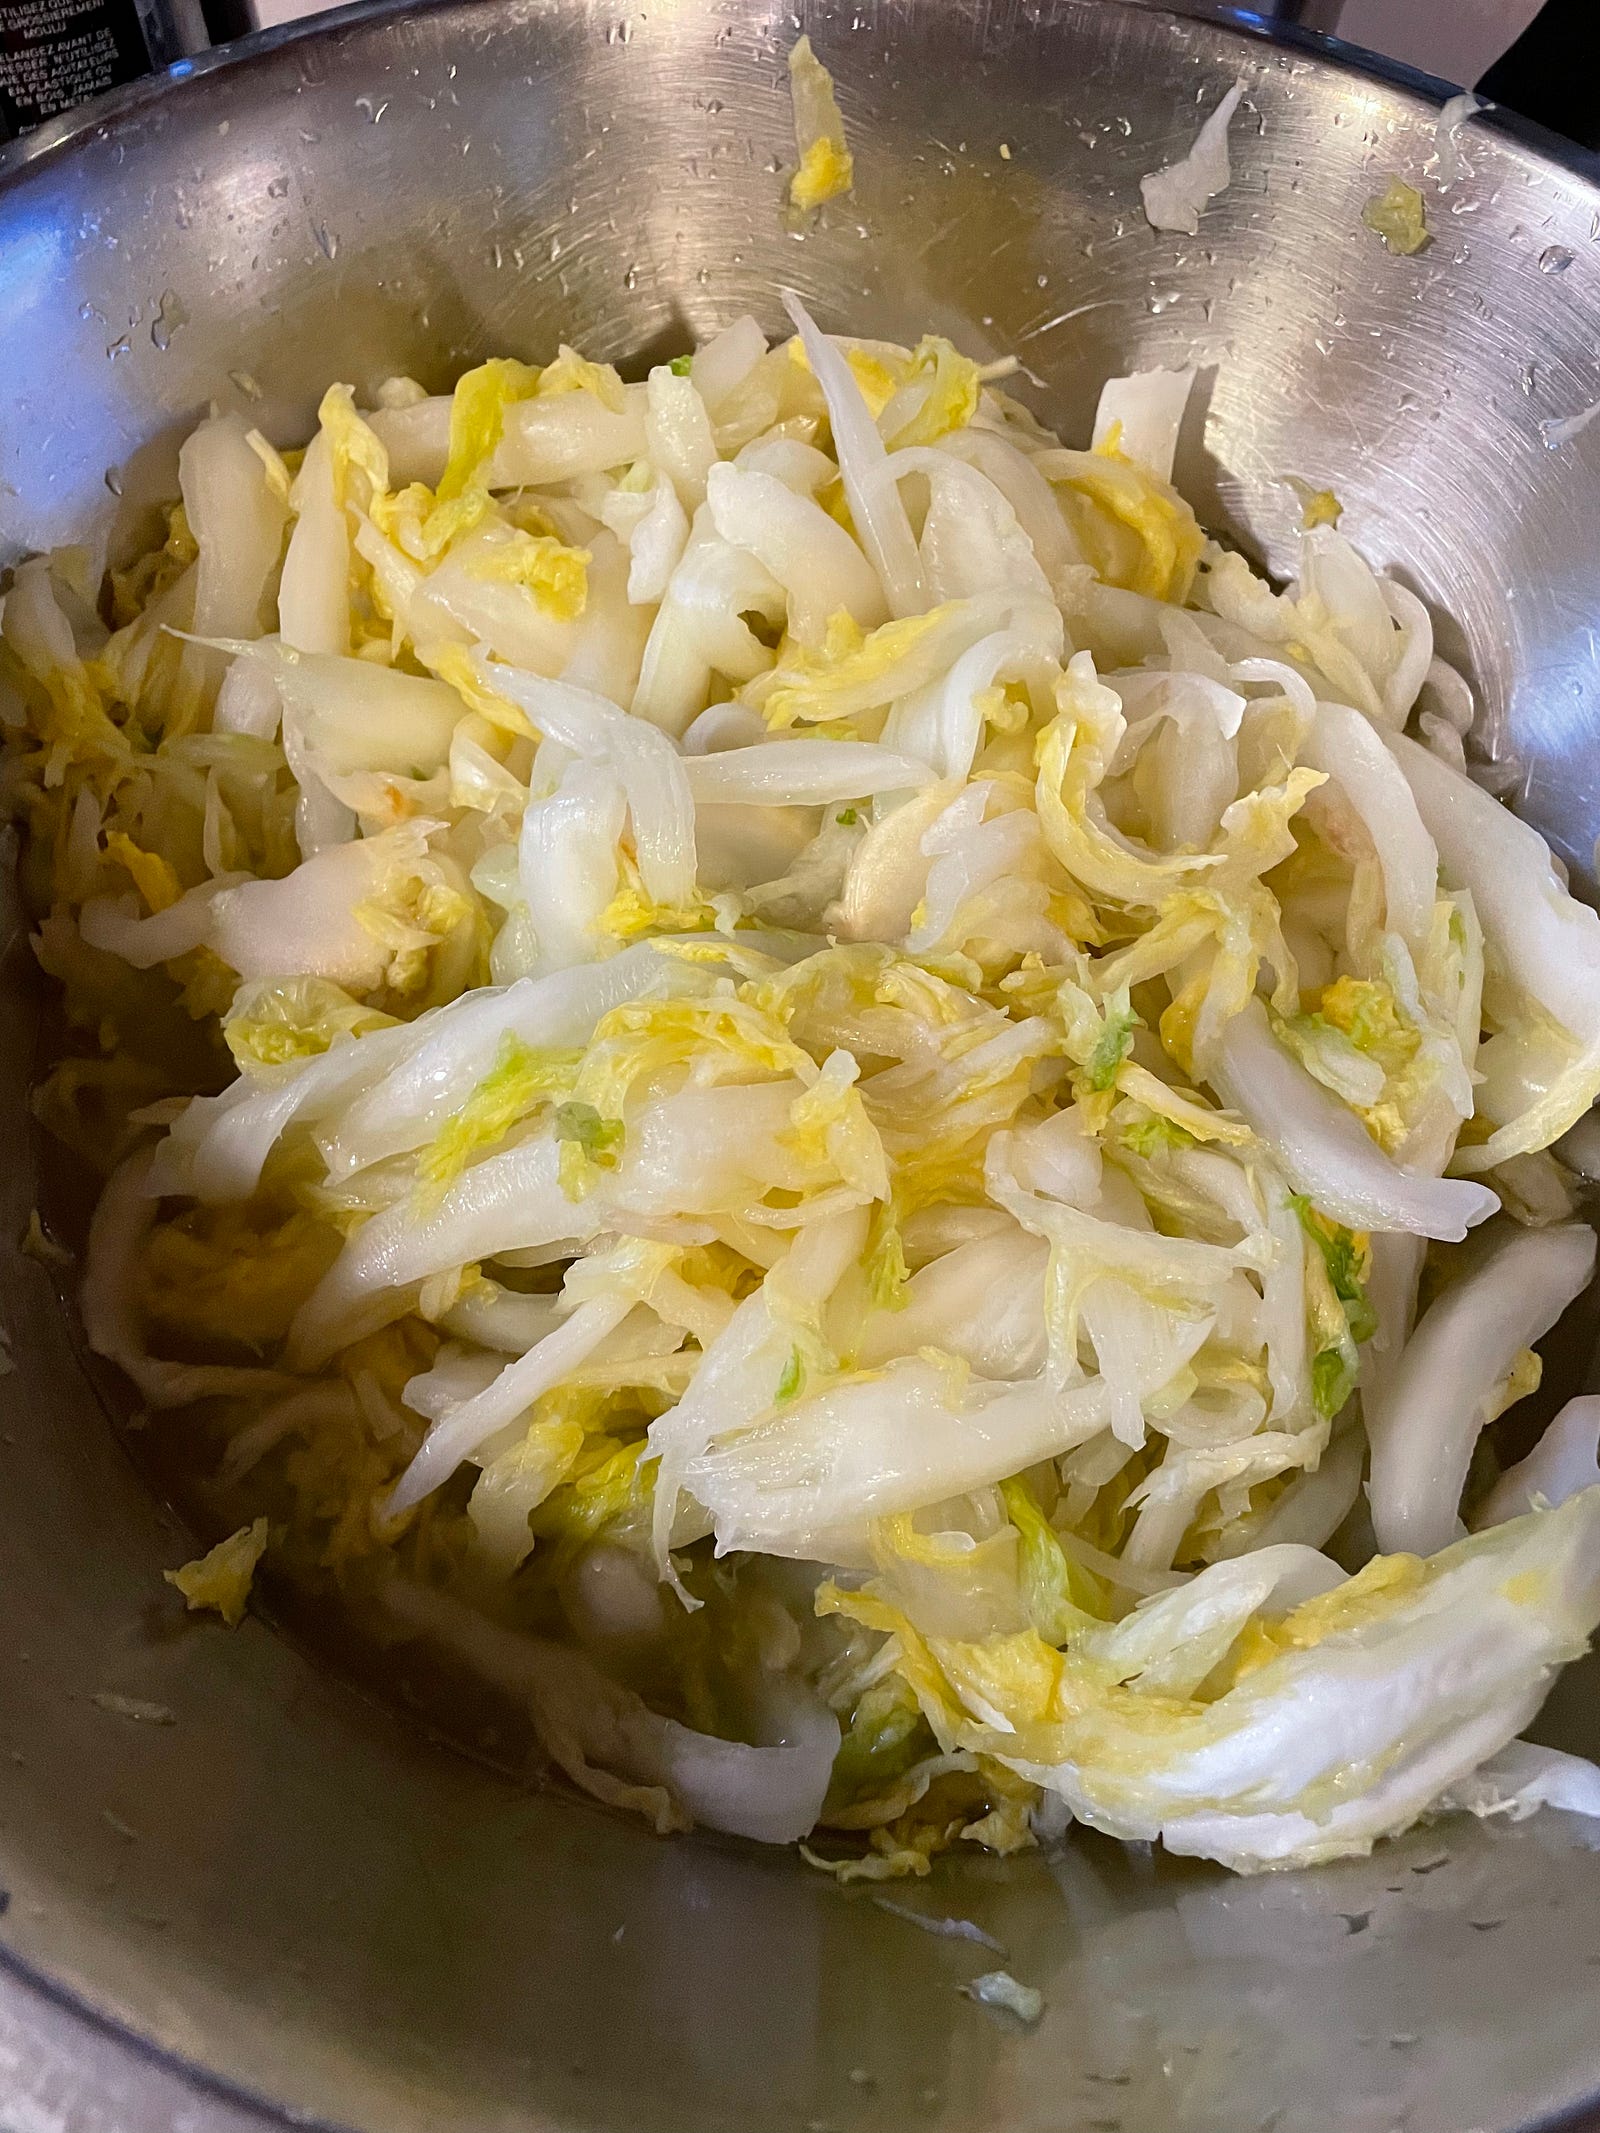 Flasid cabbage filling half of a large bowl.